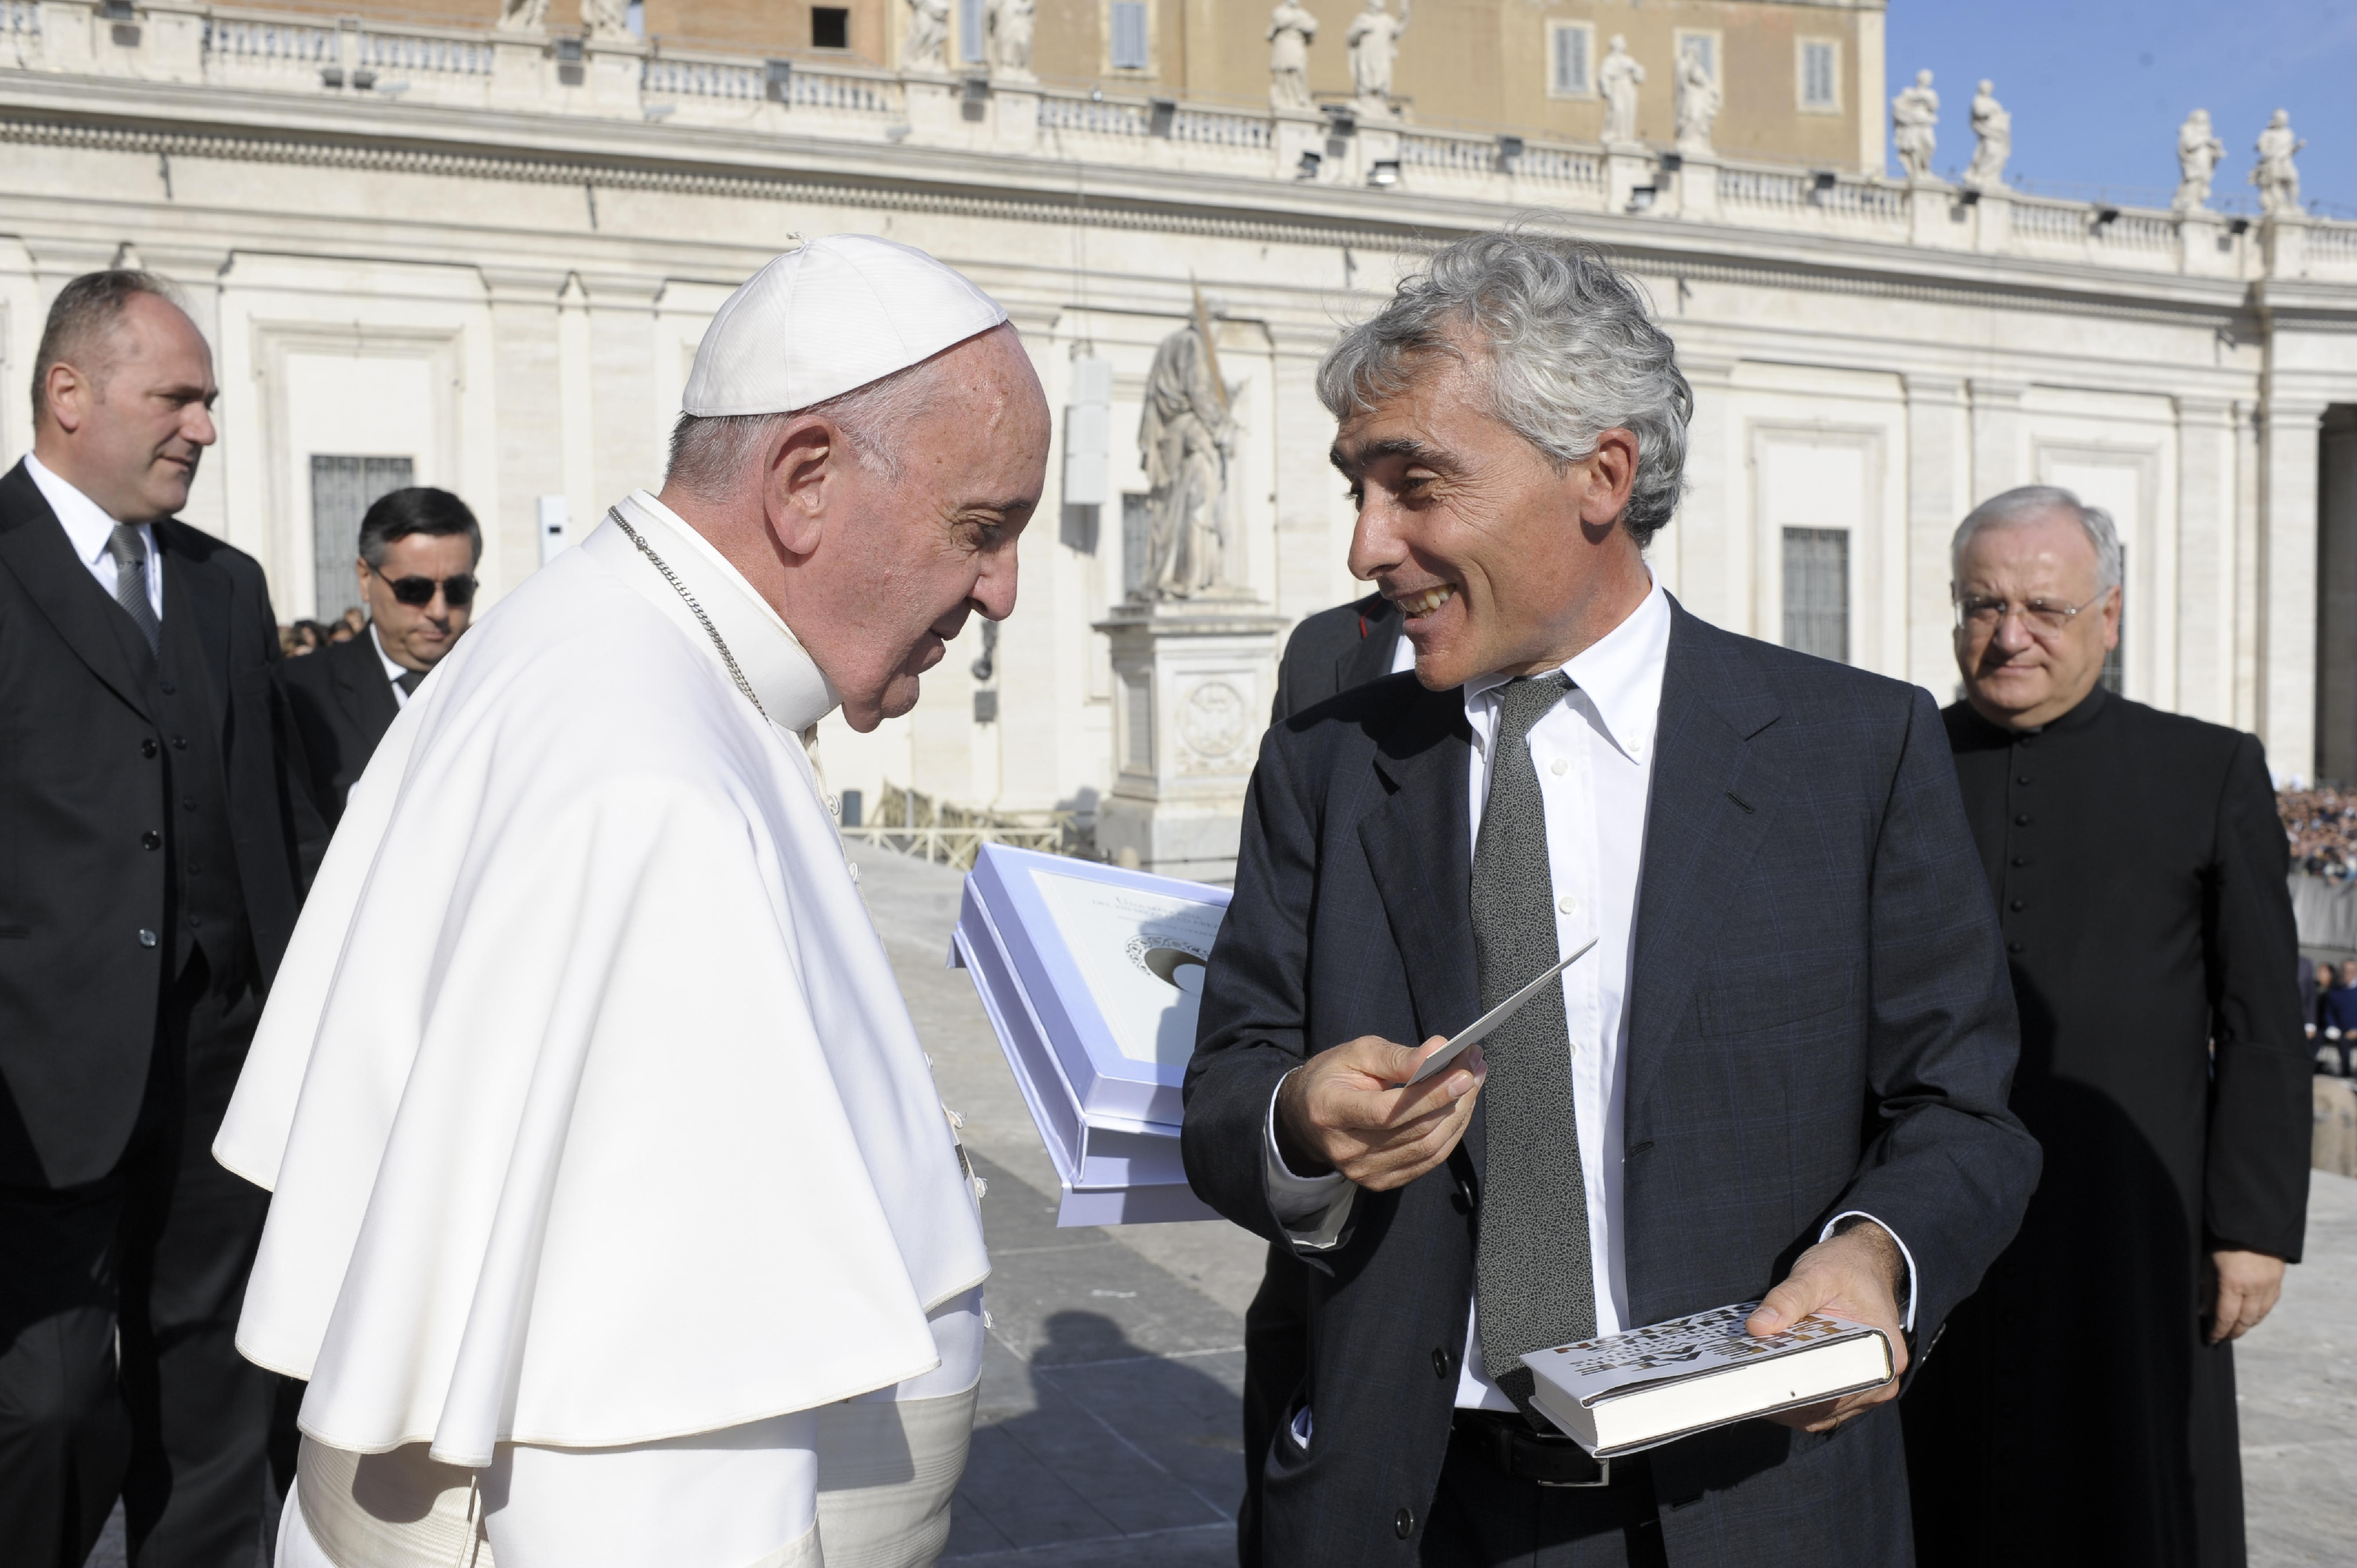 Pope Francis greets the head of the Italian National Social Security Institute or INPS